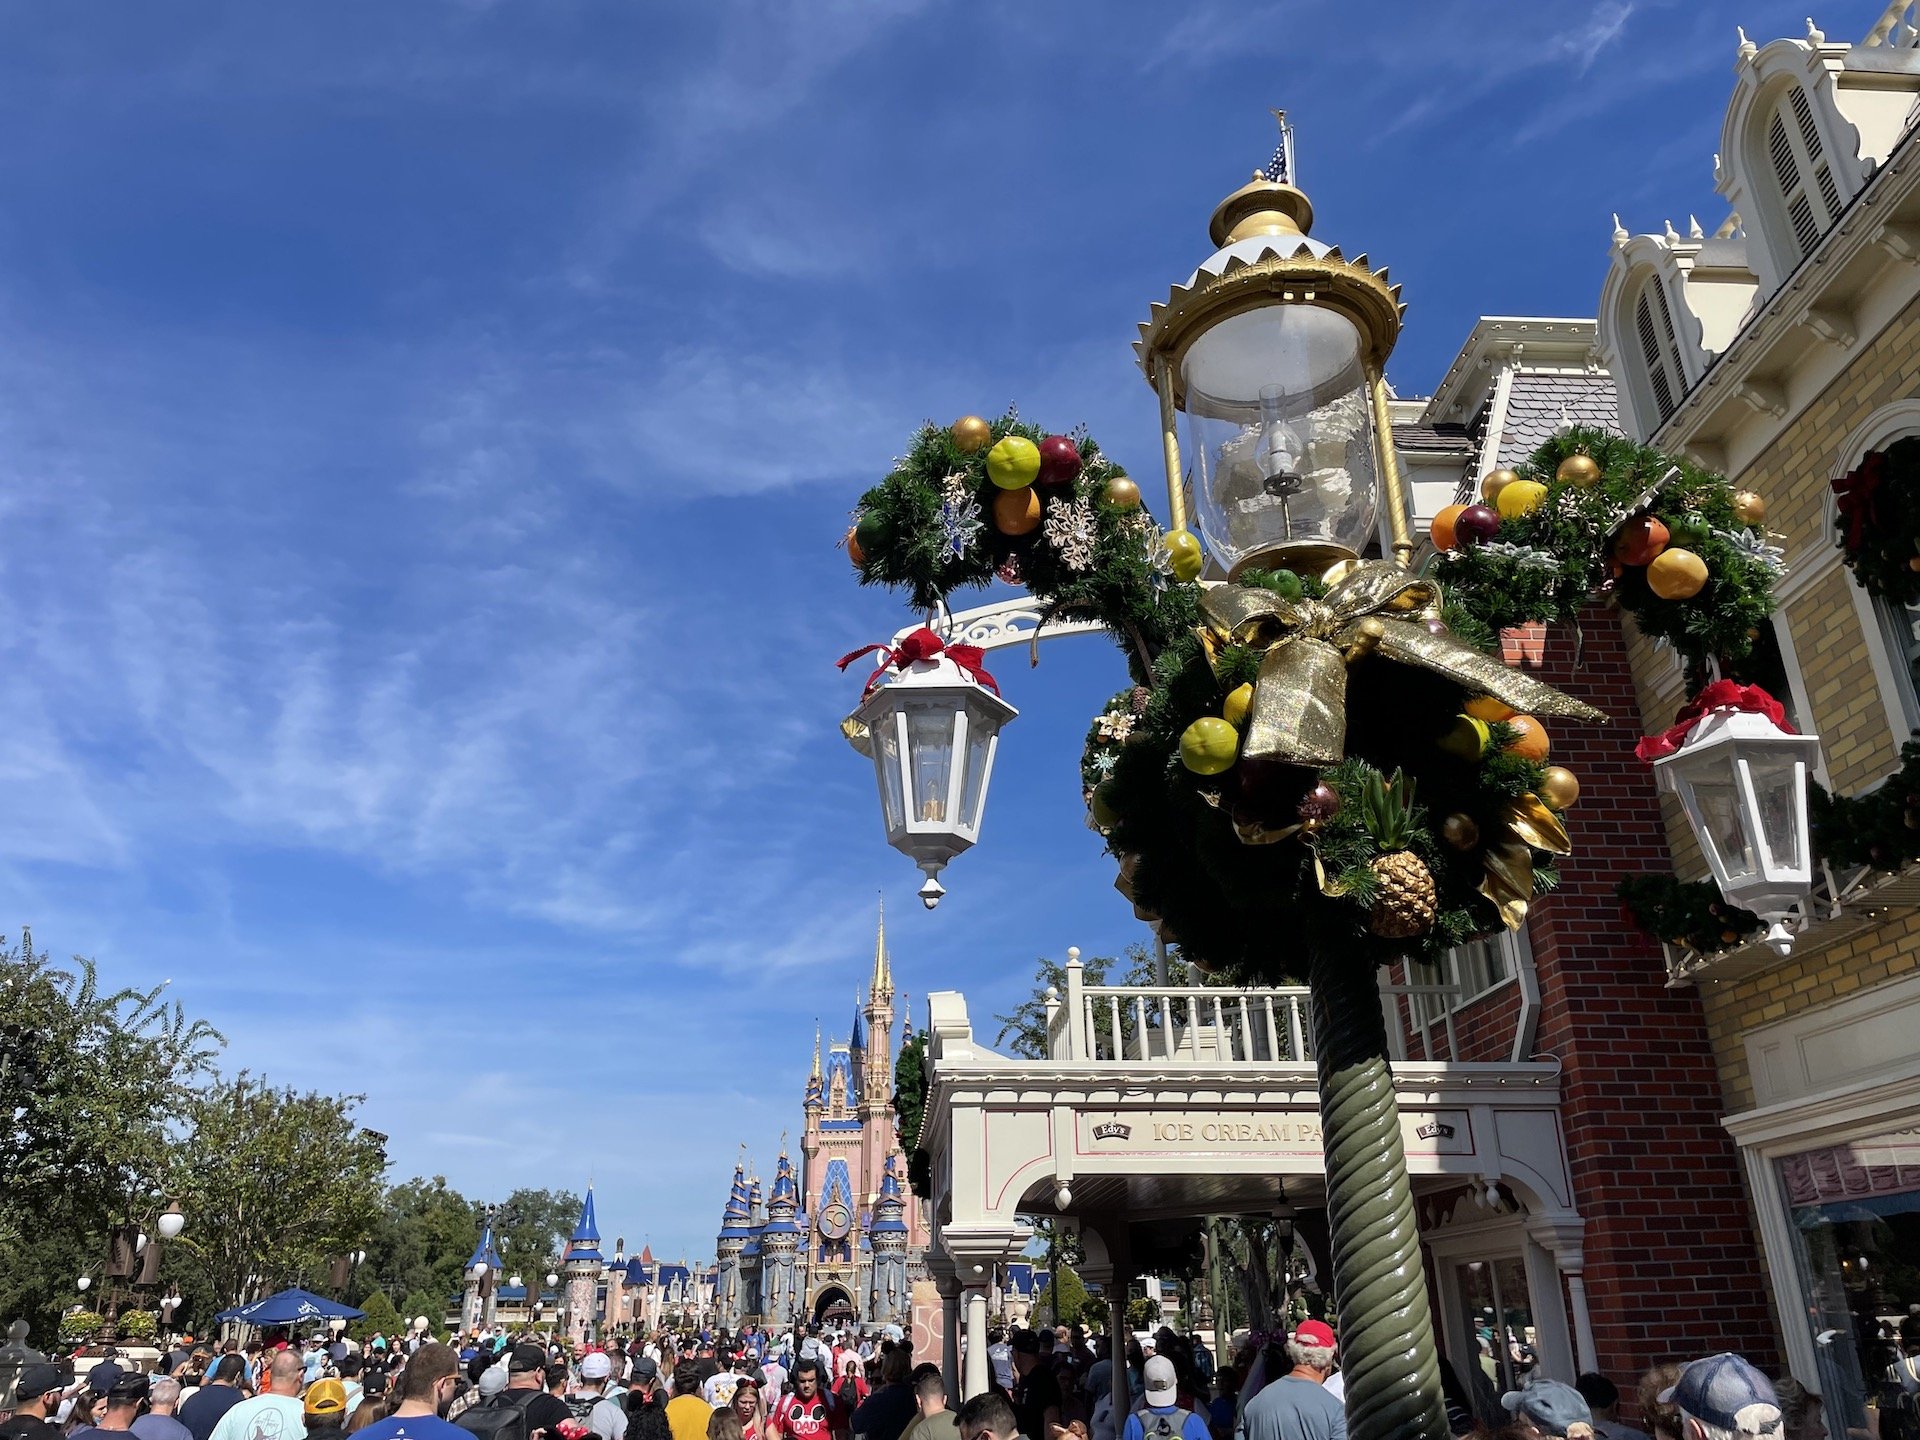 How to Plan Your Disney World Halloween Trip, According to the Experts